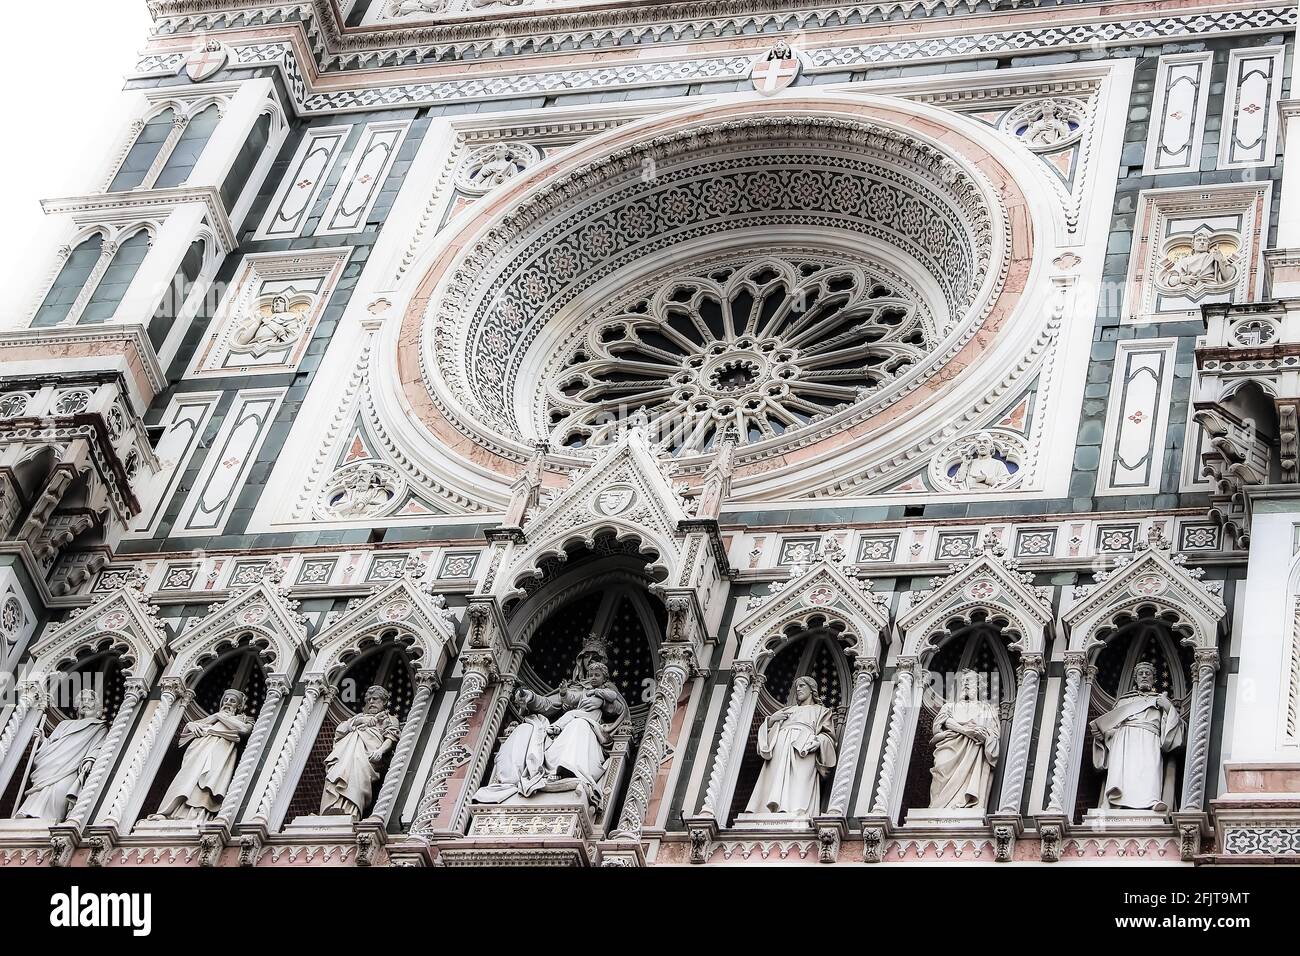 Impressive cathedral in Florence. Stock Photo